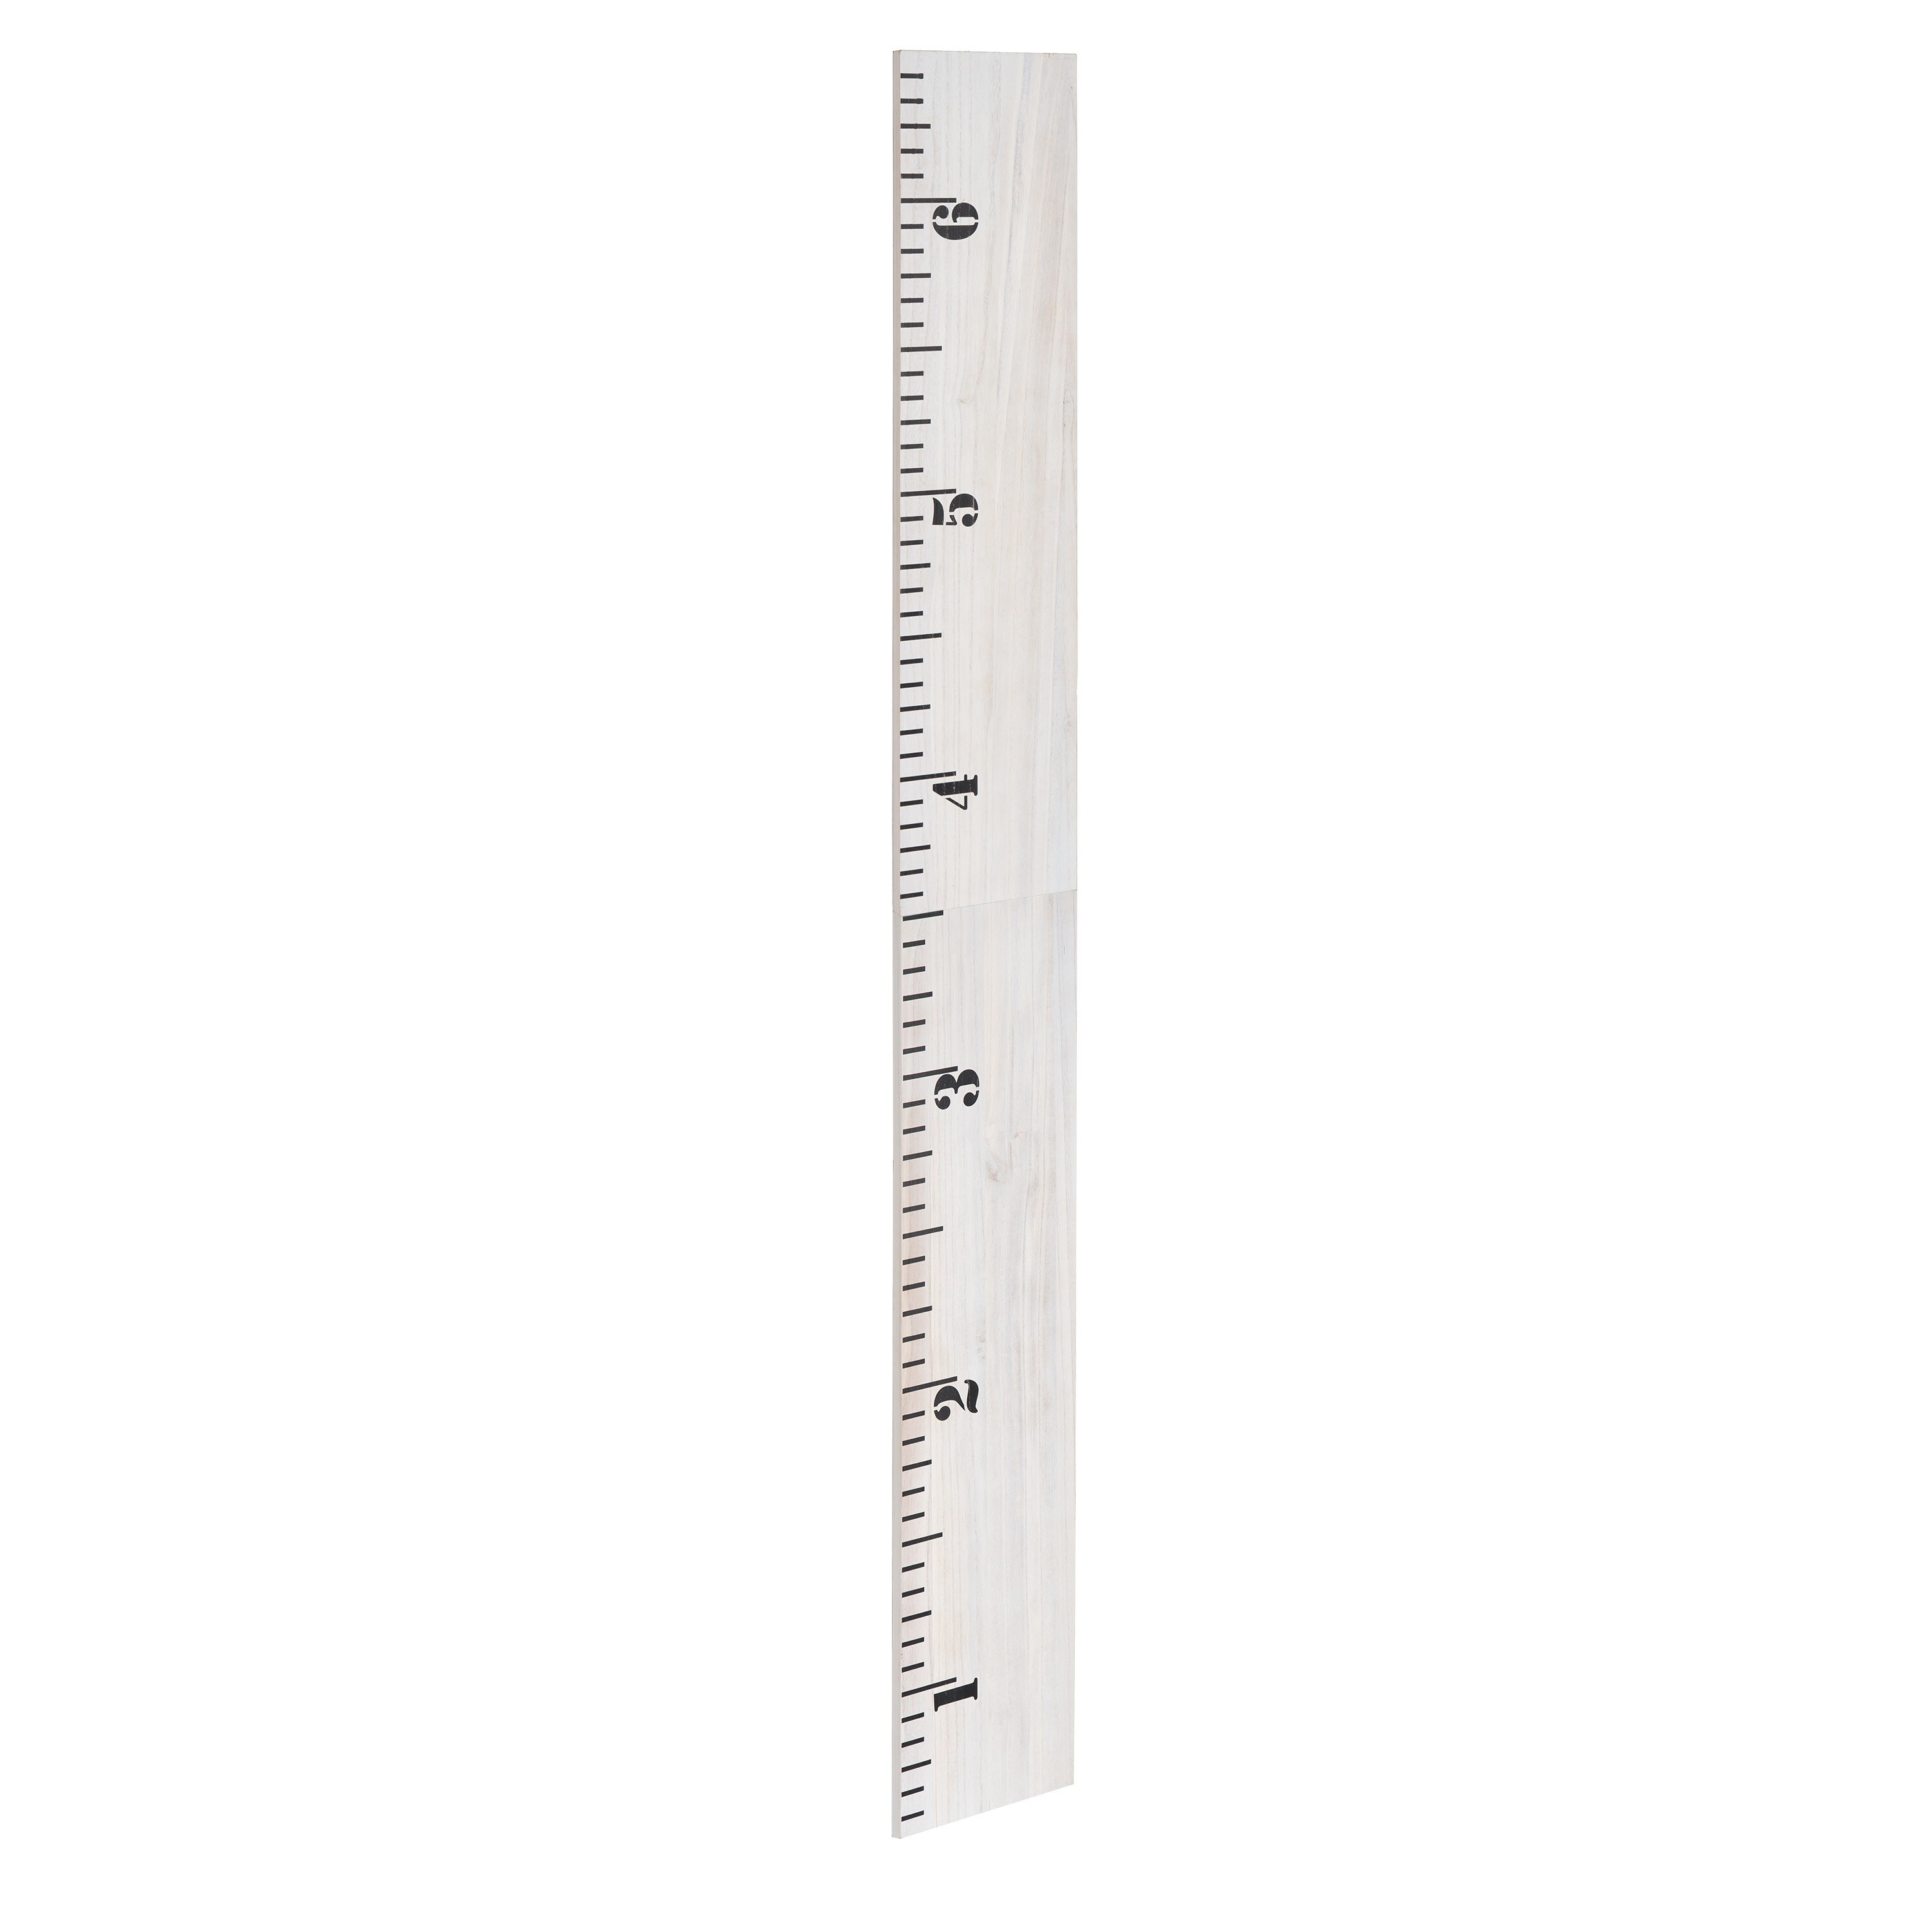 Measure Me Children's Roll-Up Growth Height Chart Plain cm inch Big White One 